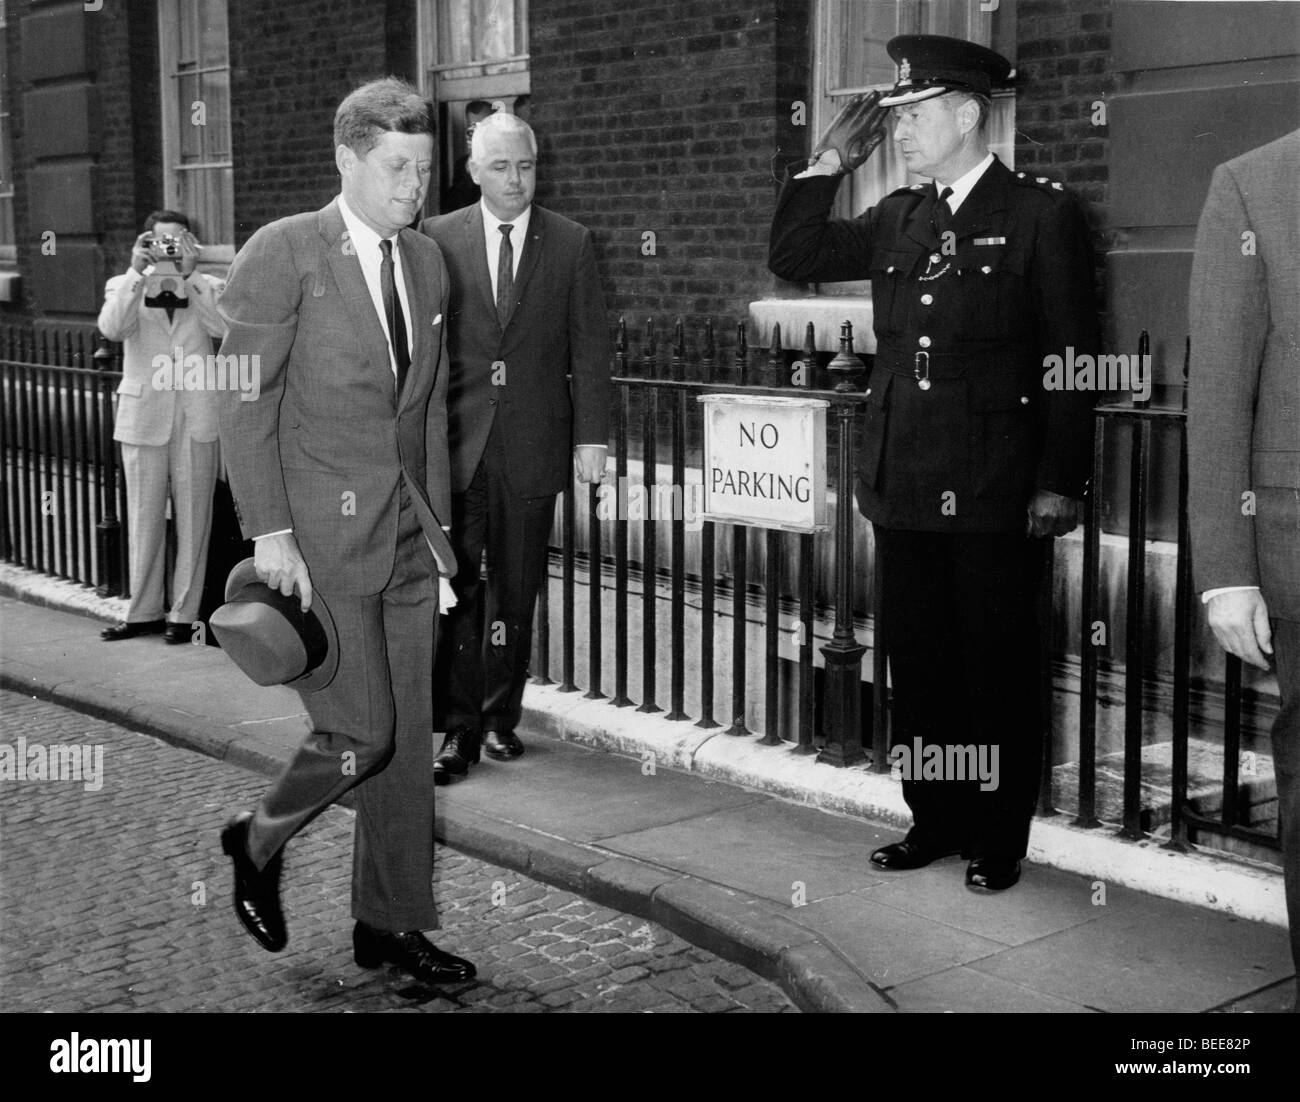 US President John F Kennedy arrives at No.10 Downing Street for a visit with British Prime Minister McMillan. Stock Photo